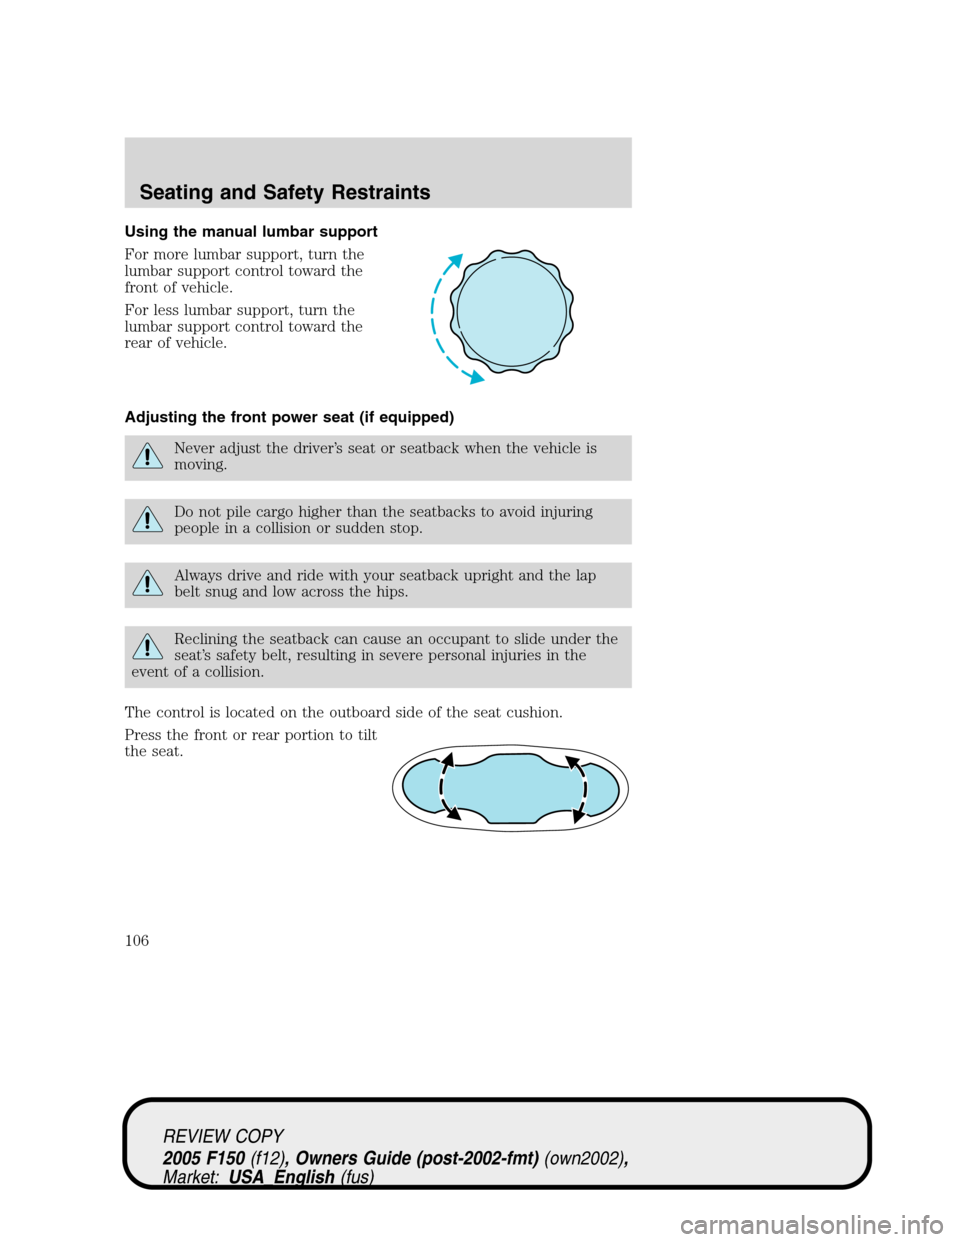 FORD F150 2005 11.G Owners Manual Using the manual lumbar support
For more lumbar support, turn the
lumbar support control toward the
front of vehicle.
For less lumbar support, turn the
lumbar support control toward the
rear of vehicl